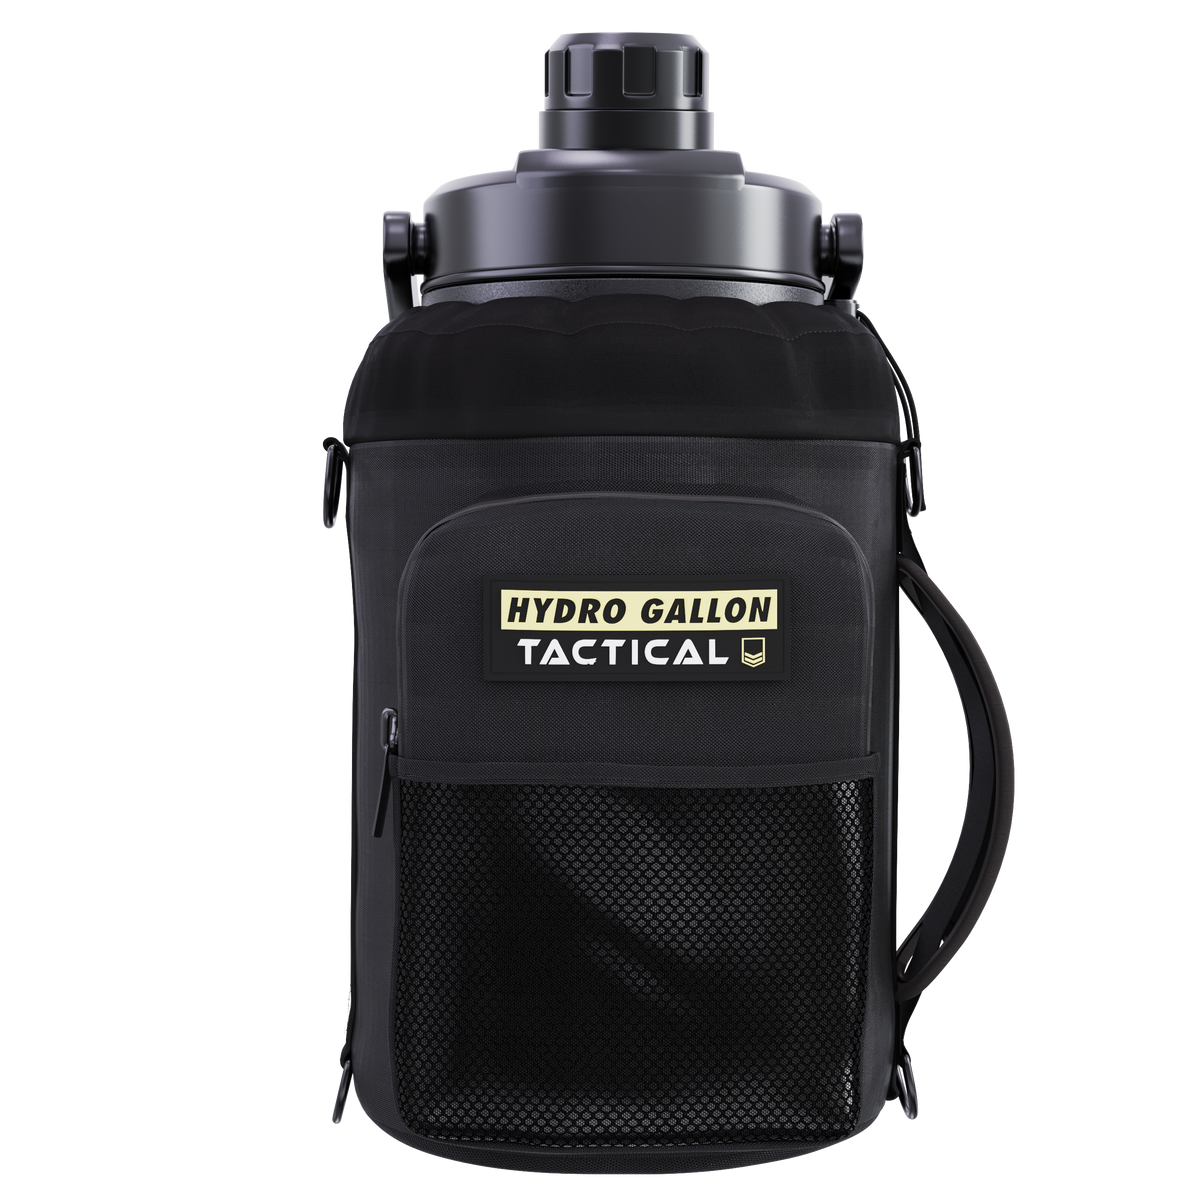 hydro gallon tactical 1 one gallon water bottle jug insulated double wall vacuum stainless steel metal growler shoulder carrying strap pocket molle sleeve military grade army wide mouth dishwasher safe side top handle rugged outdoors tough